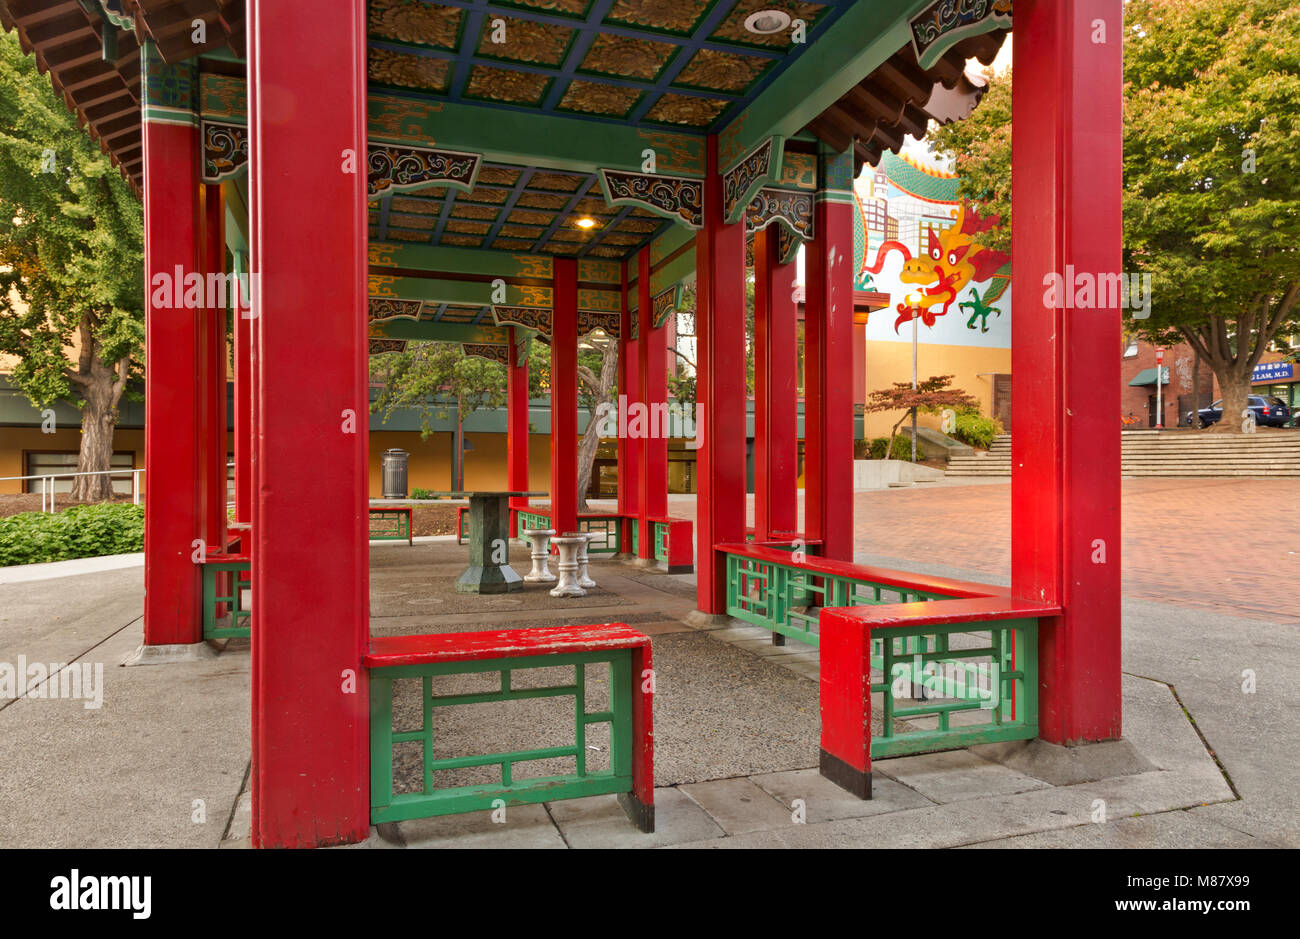 WA1384-00...WASHINGTON - The Grand Pavilion at Hing Hay Park and mural in Seattle's International District. Stock Photo